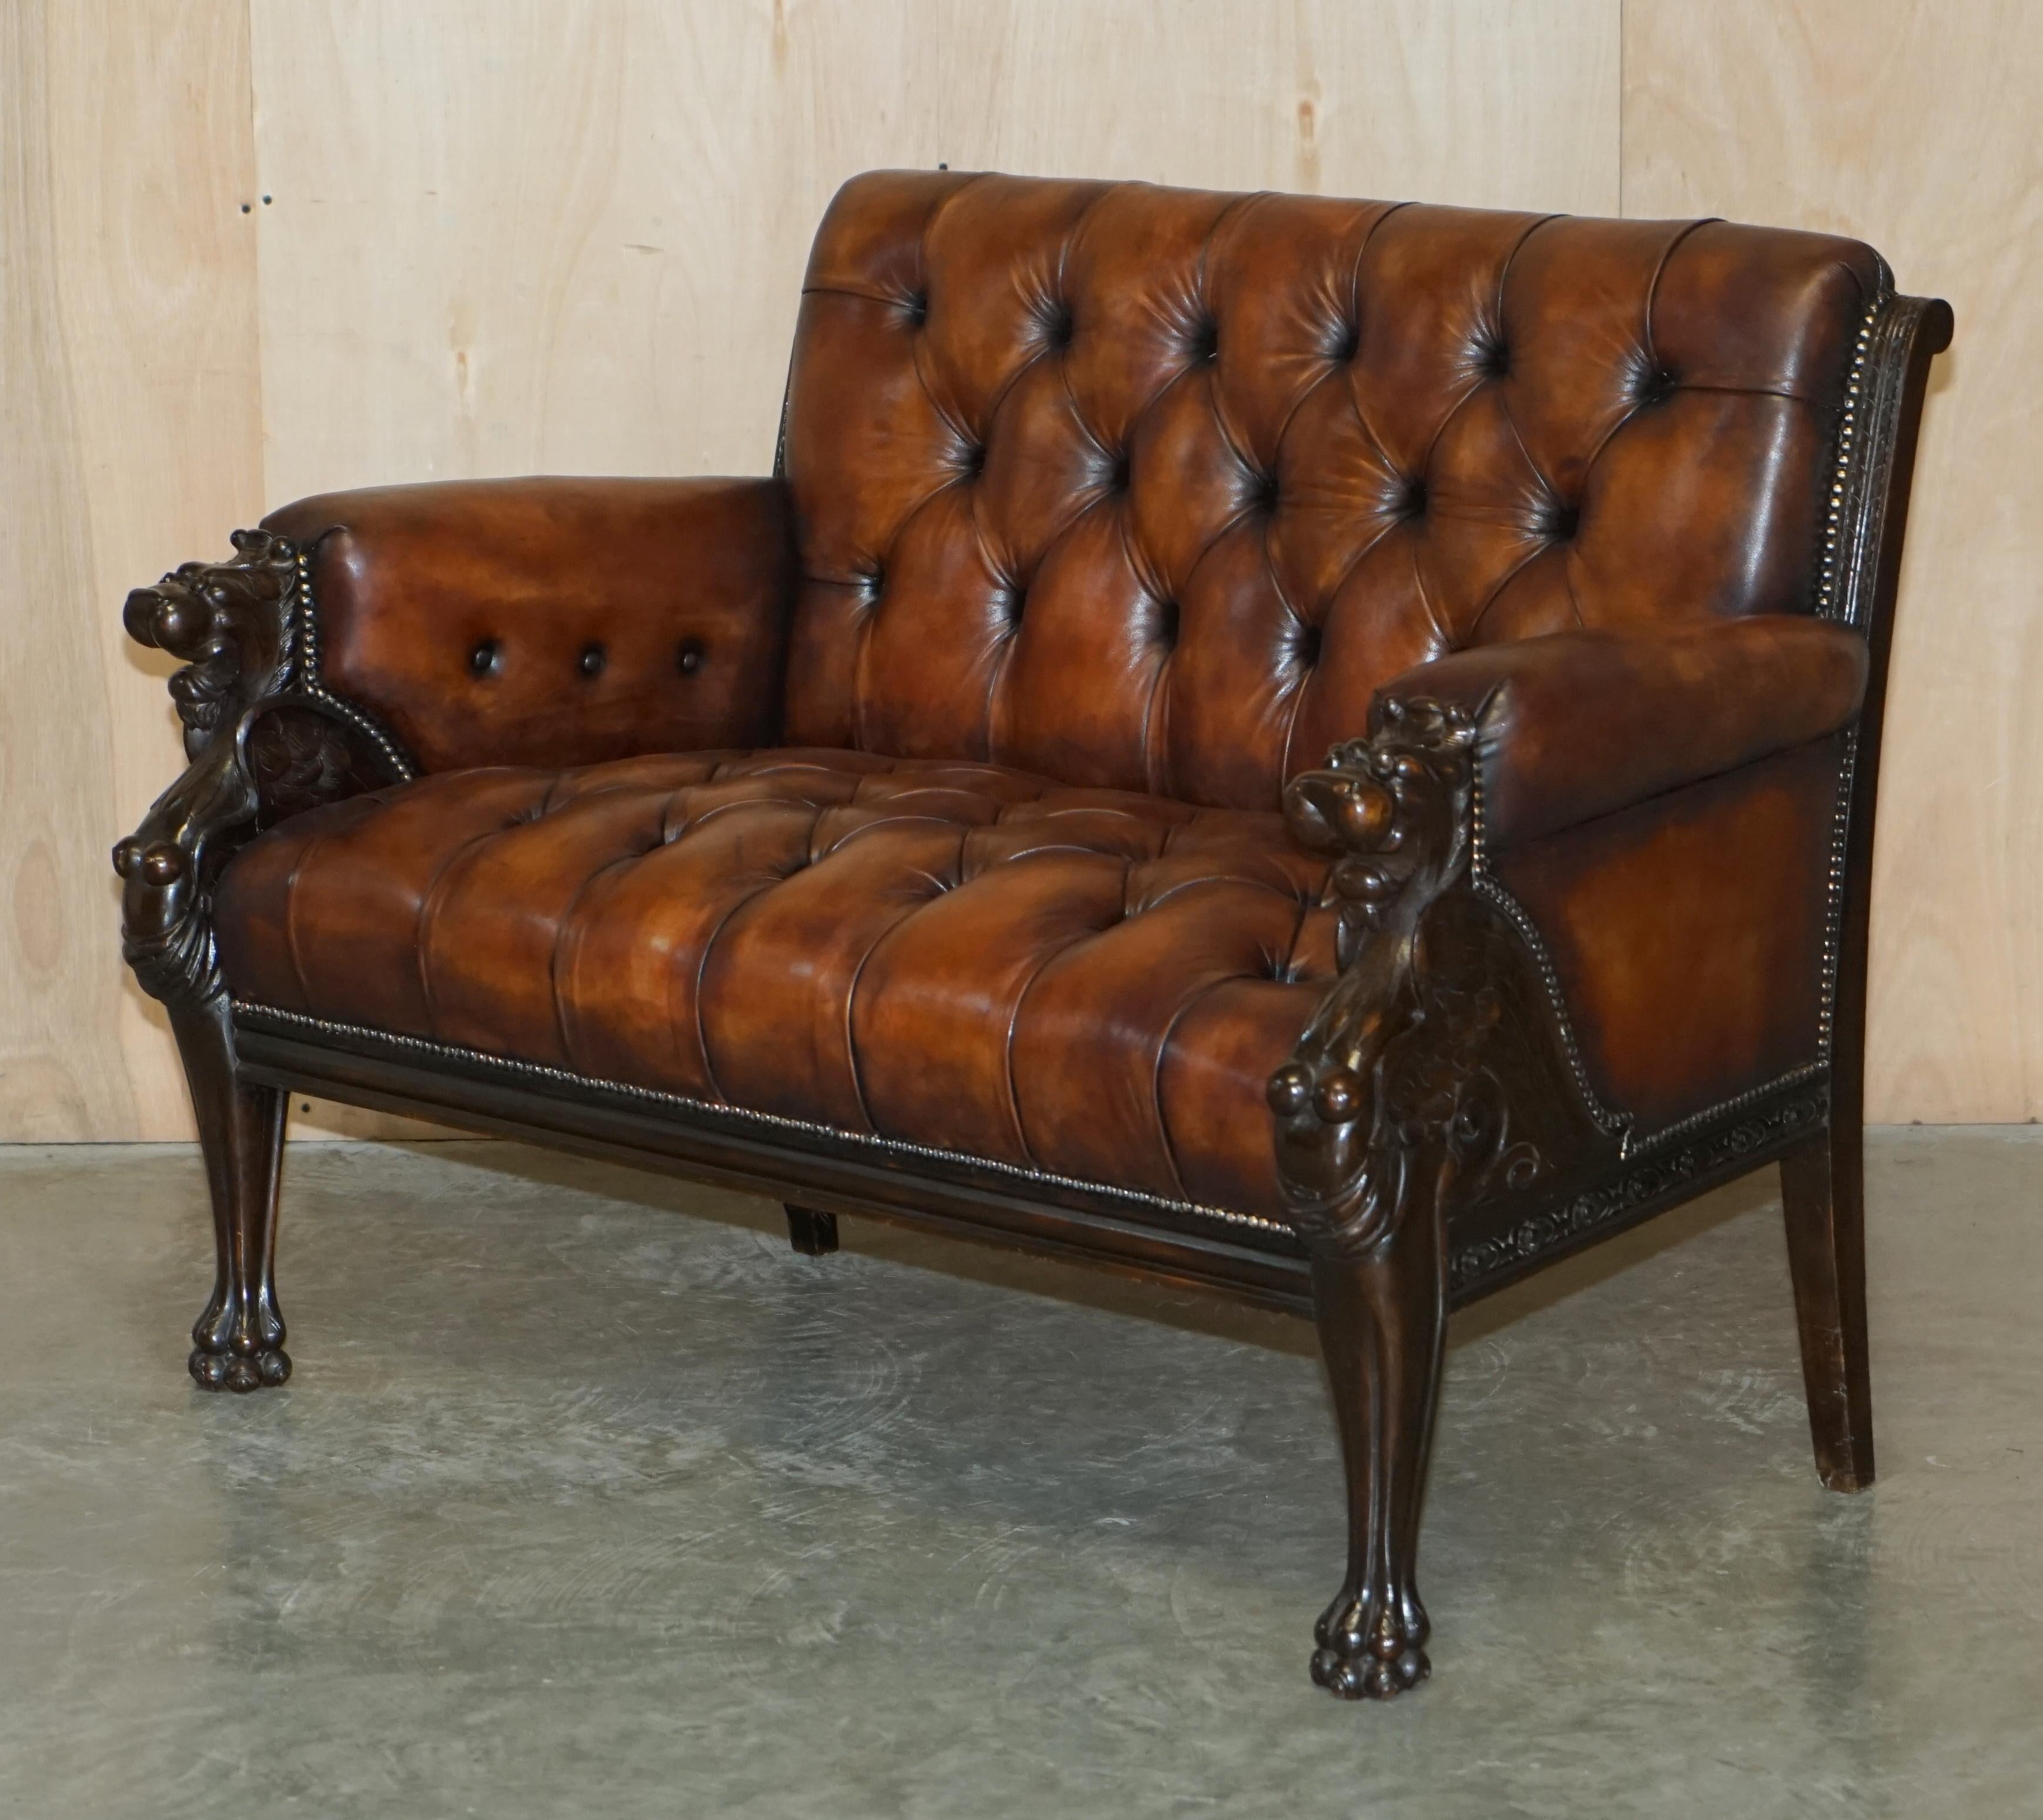 High Victorian Restored Antique Lion Hand Carved Brown Leather Chesterfield Sofa Armchair Suite For Sale